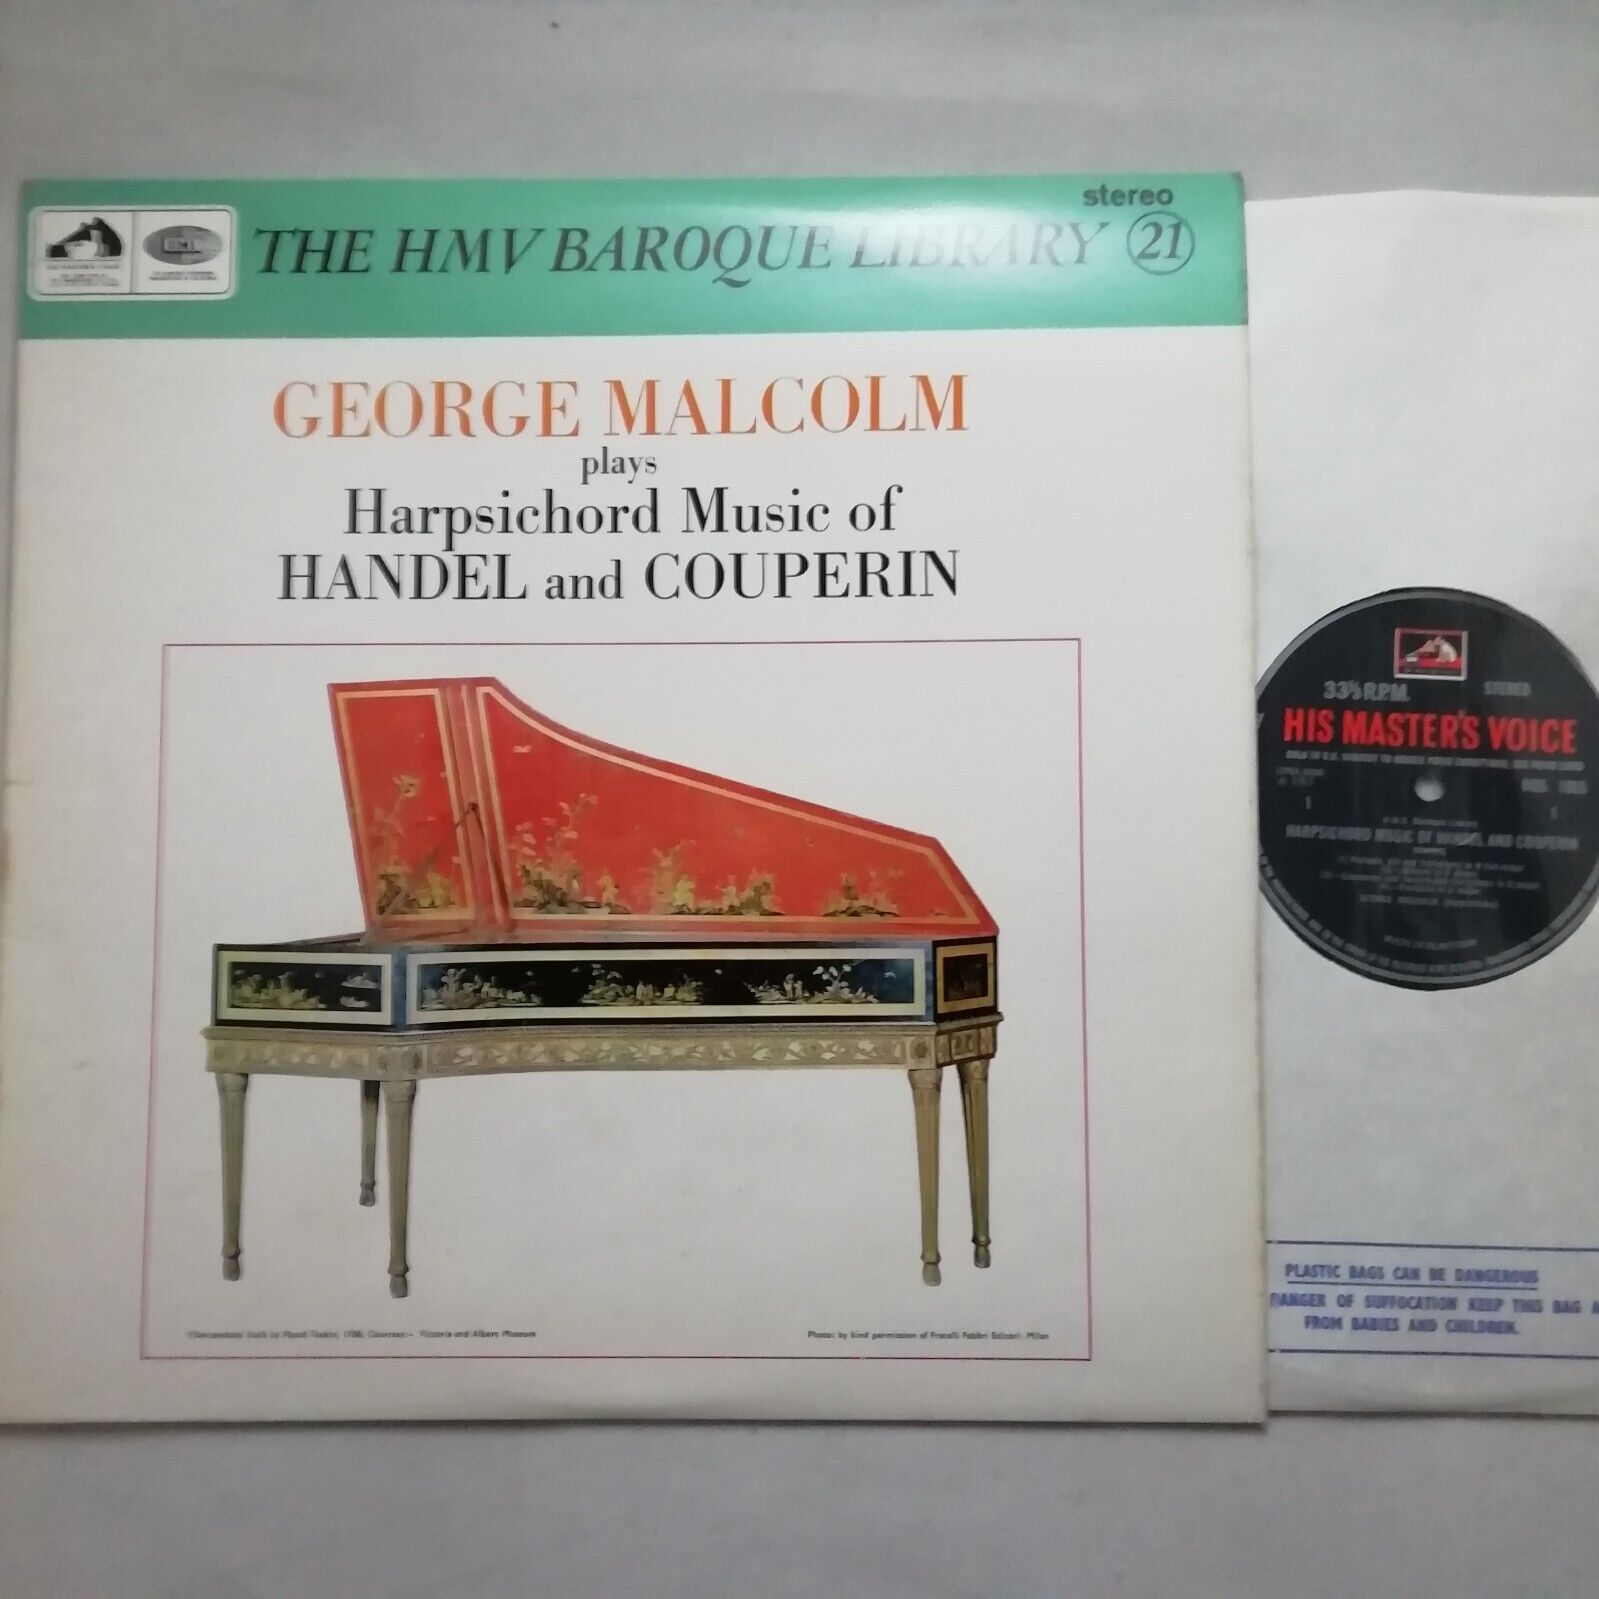 EMI LP HQS 1085: Harpsichord Music of Handel and Couperin / George Malcolm